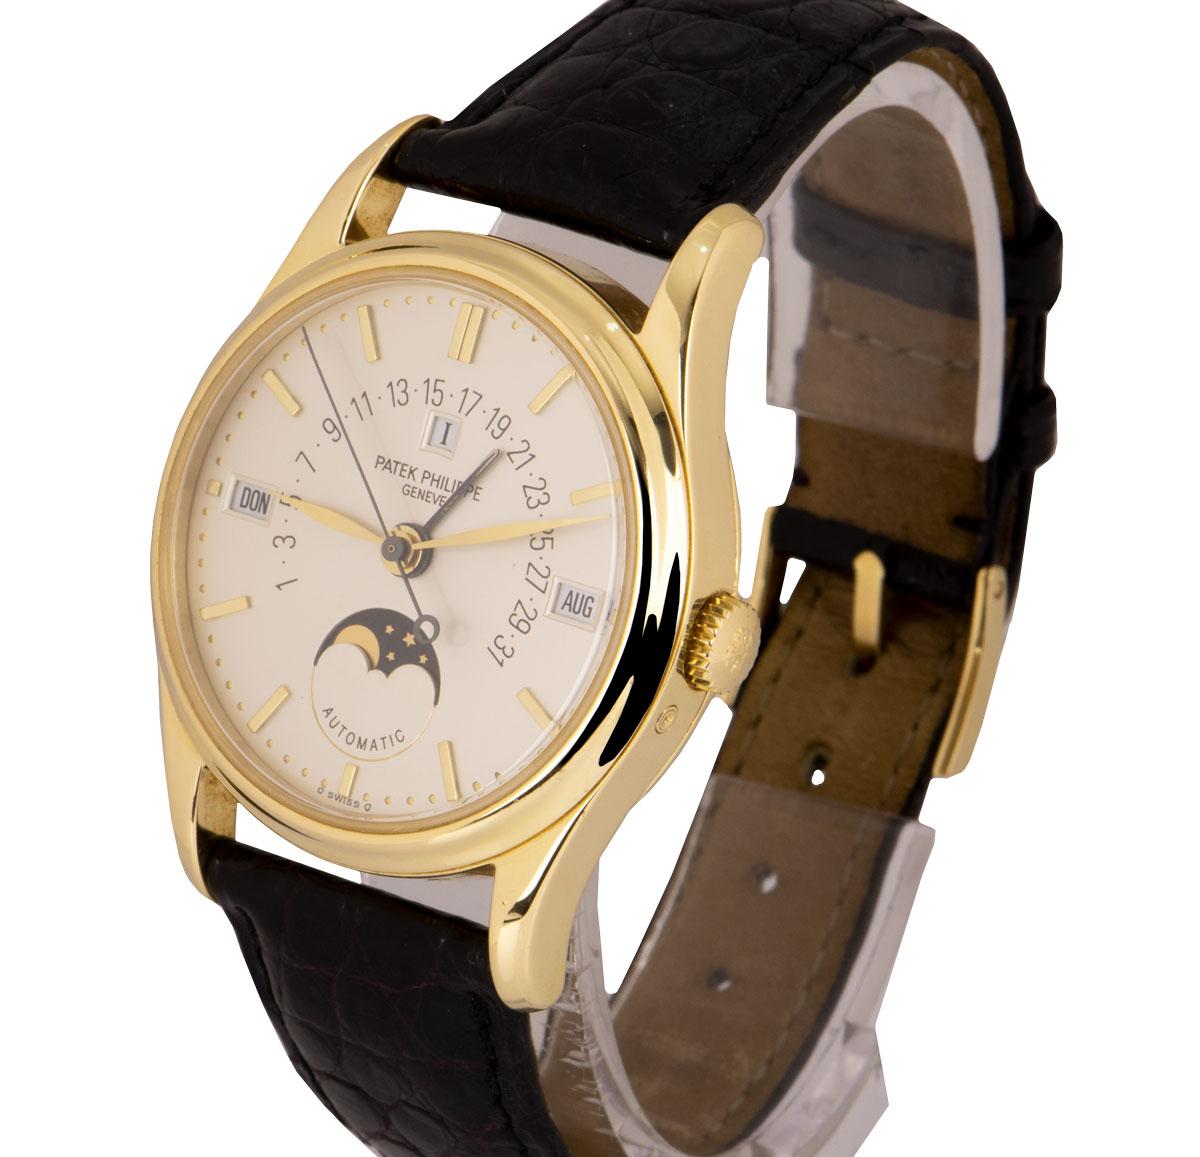 A 36 mm 18k Yellow Gold Perpetual Calendar Retrograde Gents Wristwatch, silver dial with applied hour markers, retrograde date indicator, month at 3 0'clock, moonphase display at 6 0'clock, day at 9 0'clock, leap year at 12 0'clock, a fixed 18k